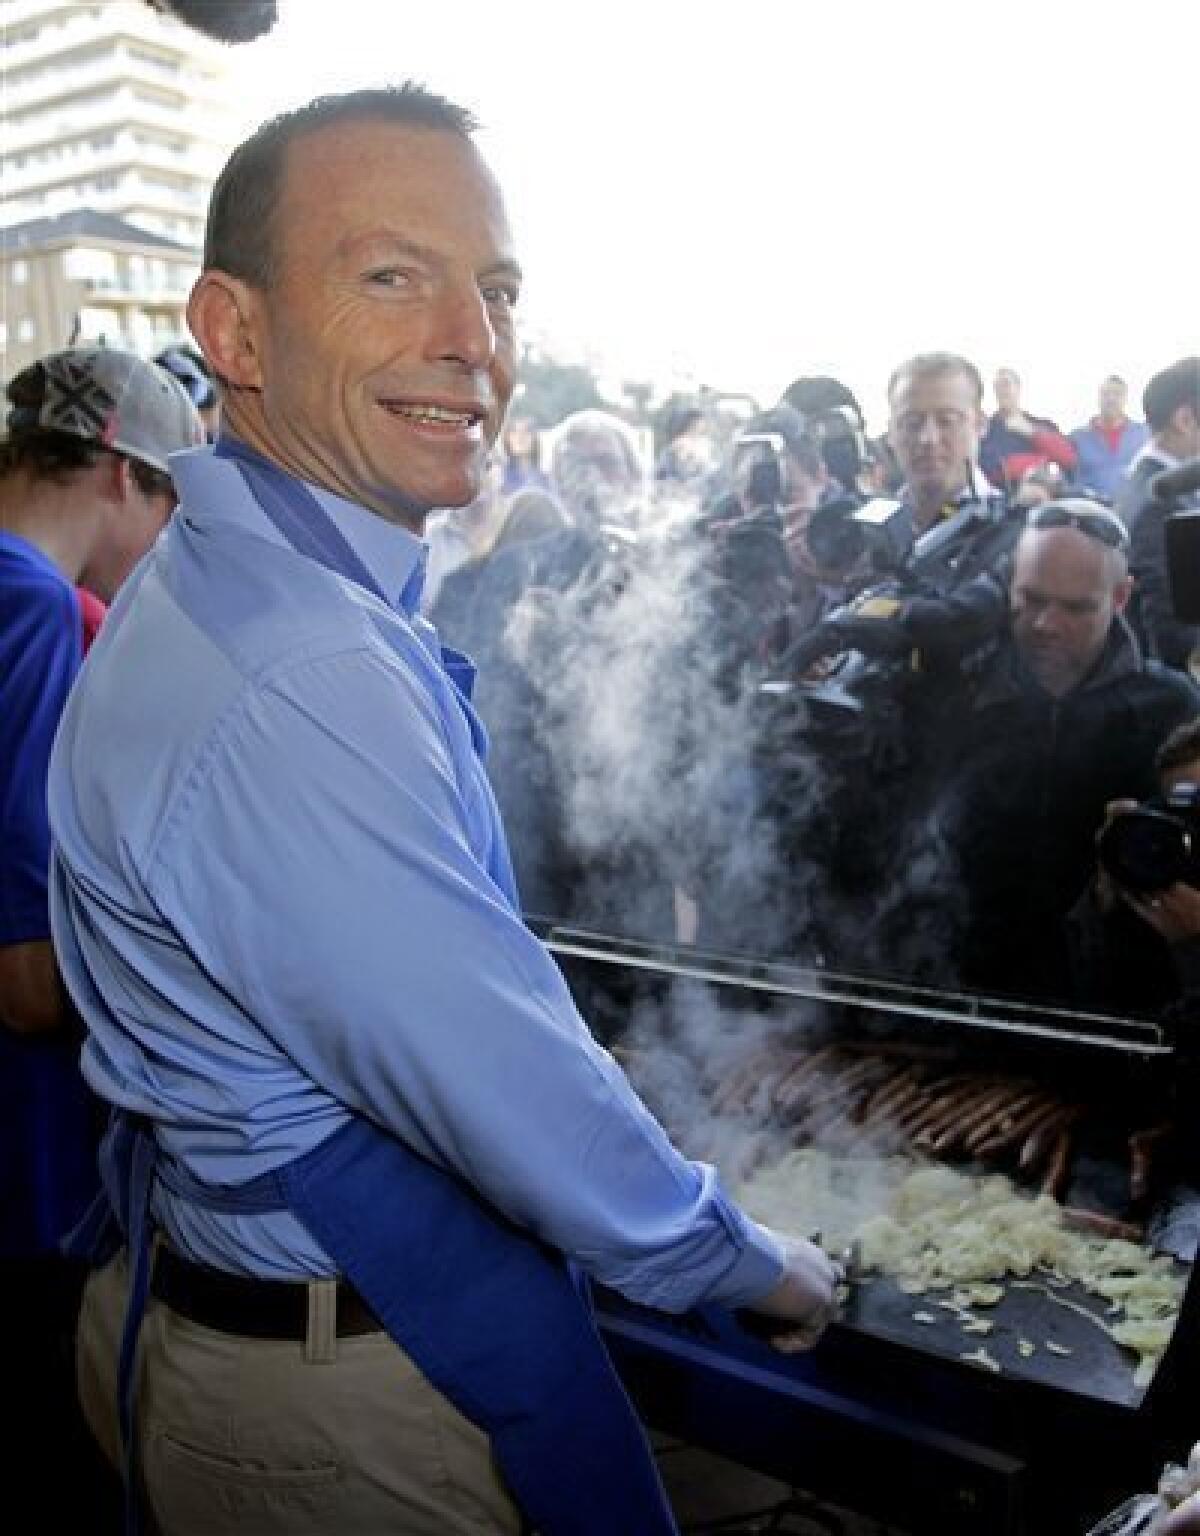 Australia's opposition leader Tony Abbott helps out at an election day sausage sizzle on Queenscliff Beach in Sydney, Australia, Saturday morning, Aug. 21, 2010. Australians go to the polls Saturday to vote in the federal election. (AP Photo/Rob Griffith)